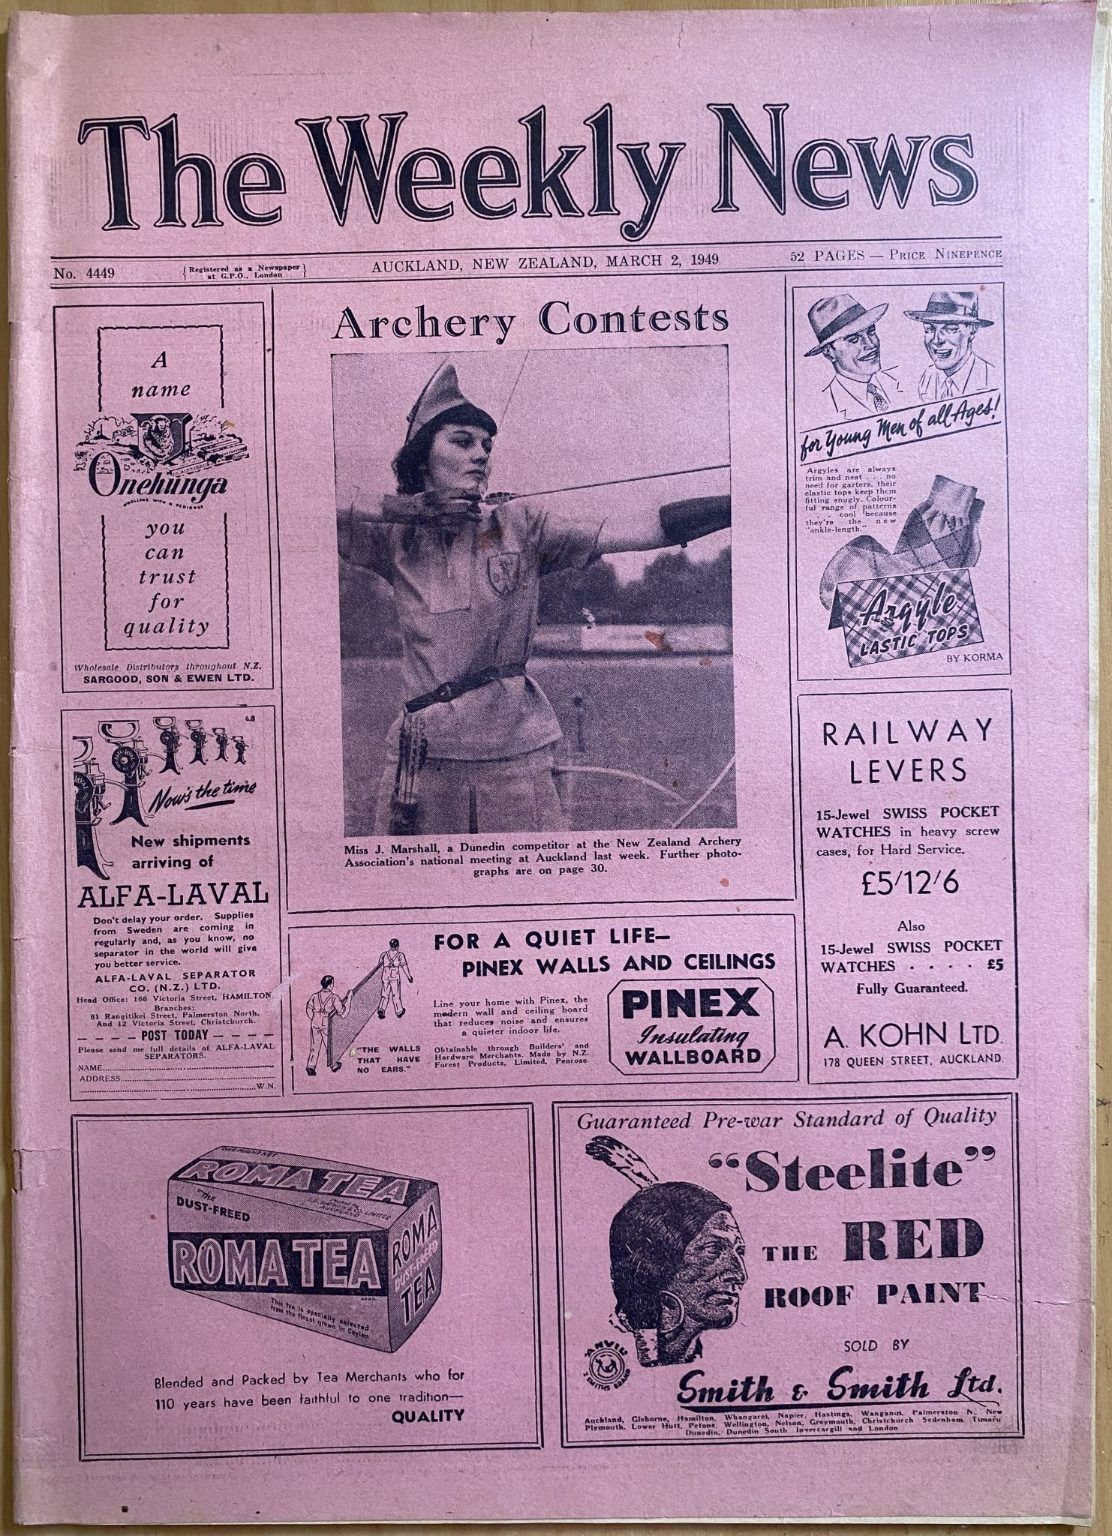 OLD NEWSPAPER: The Weekly News, No. 4449, 2 March 1949